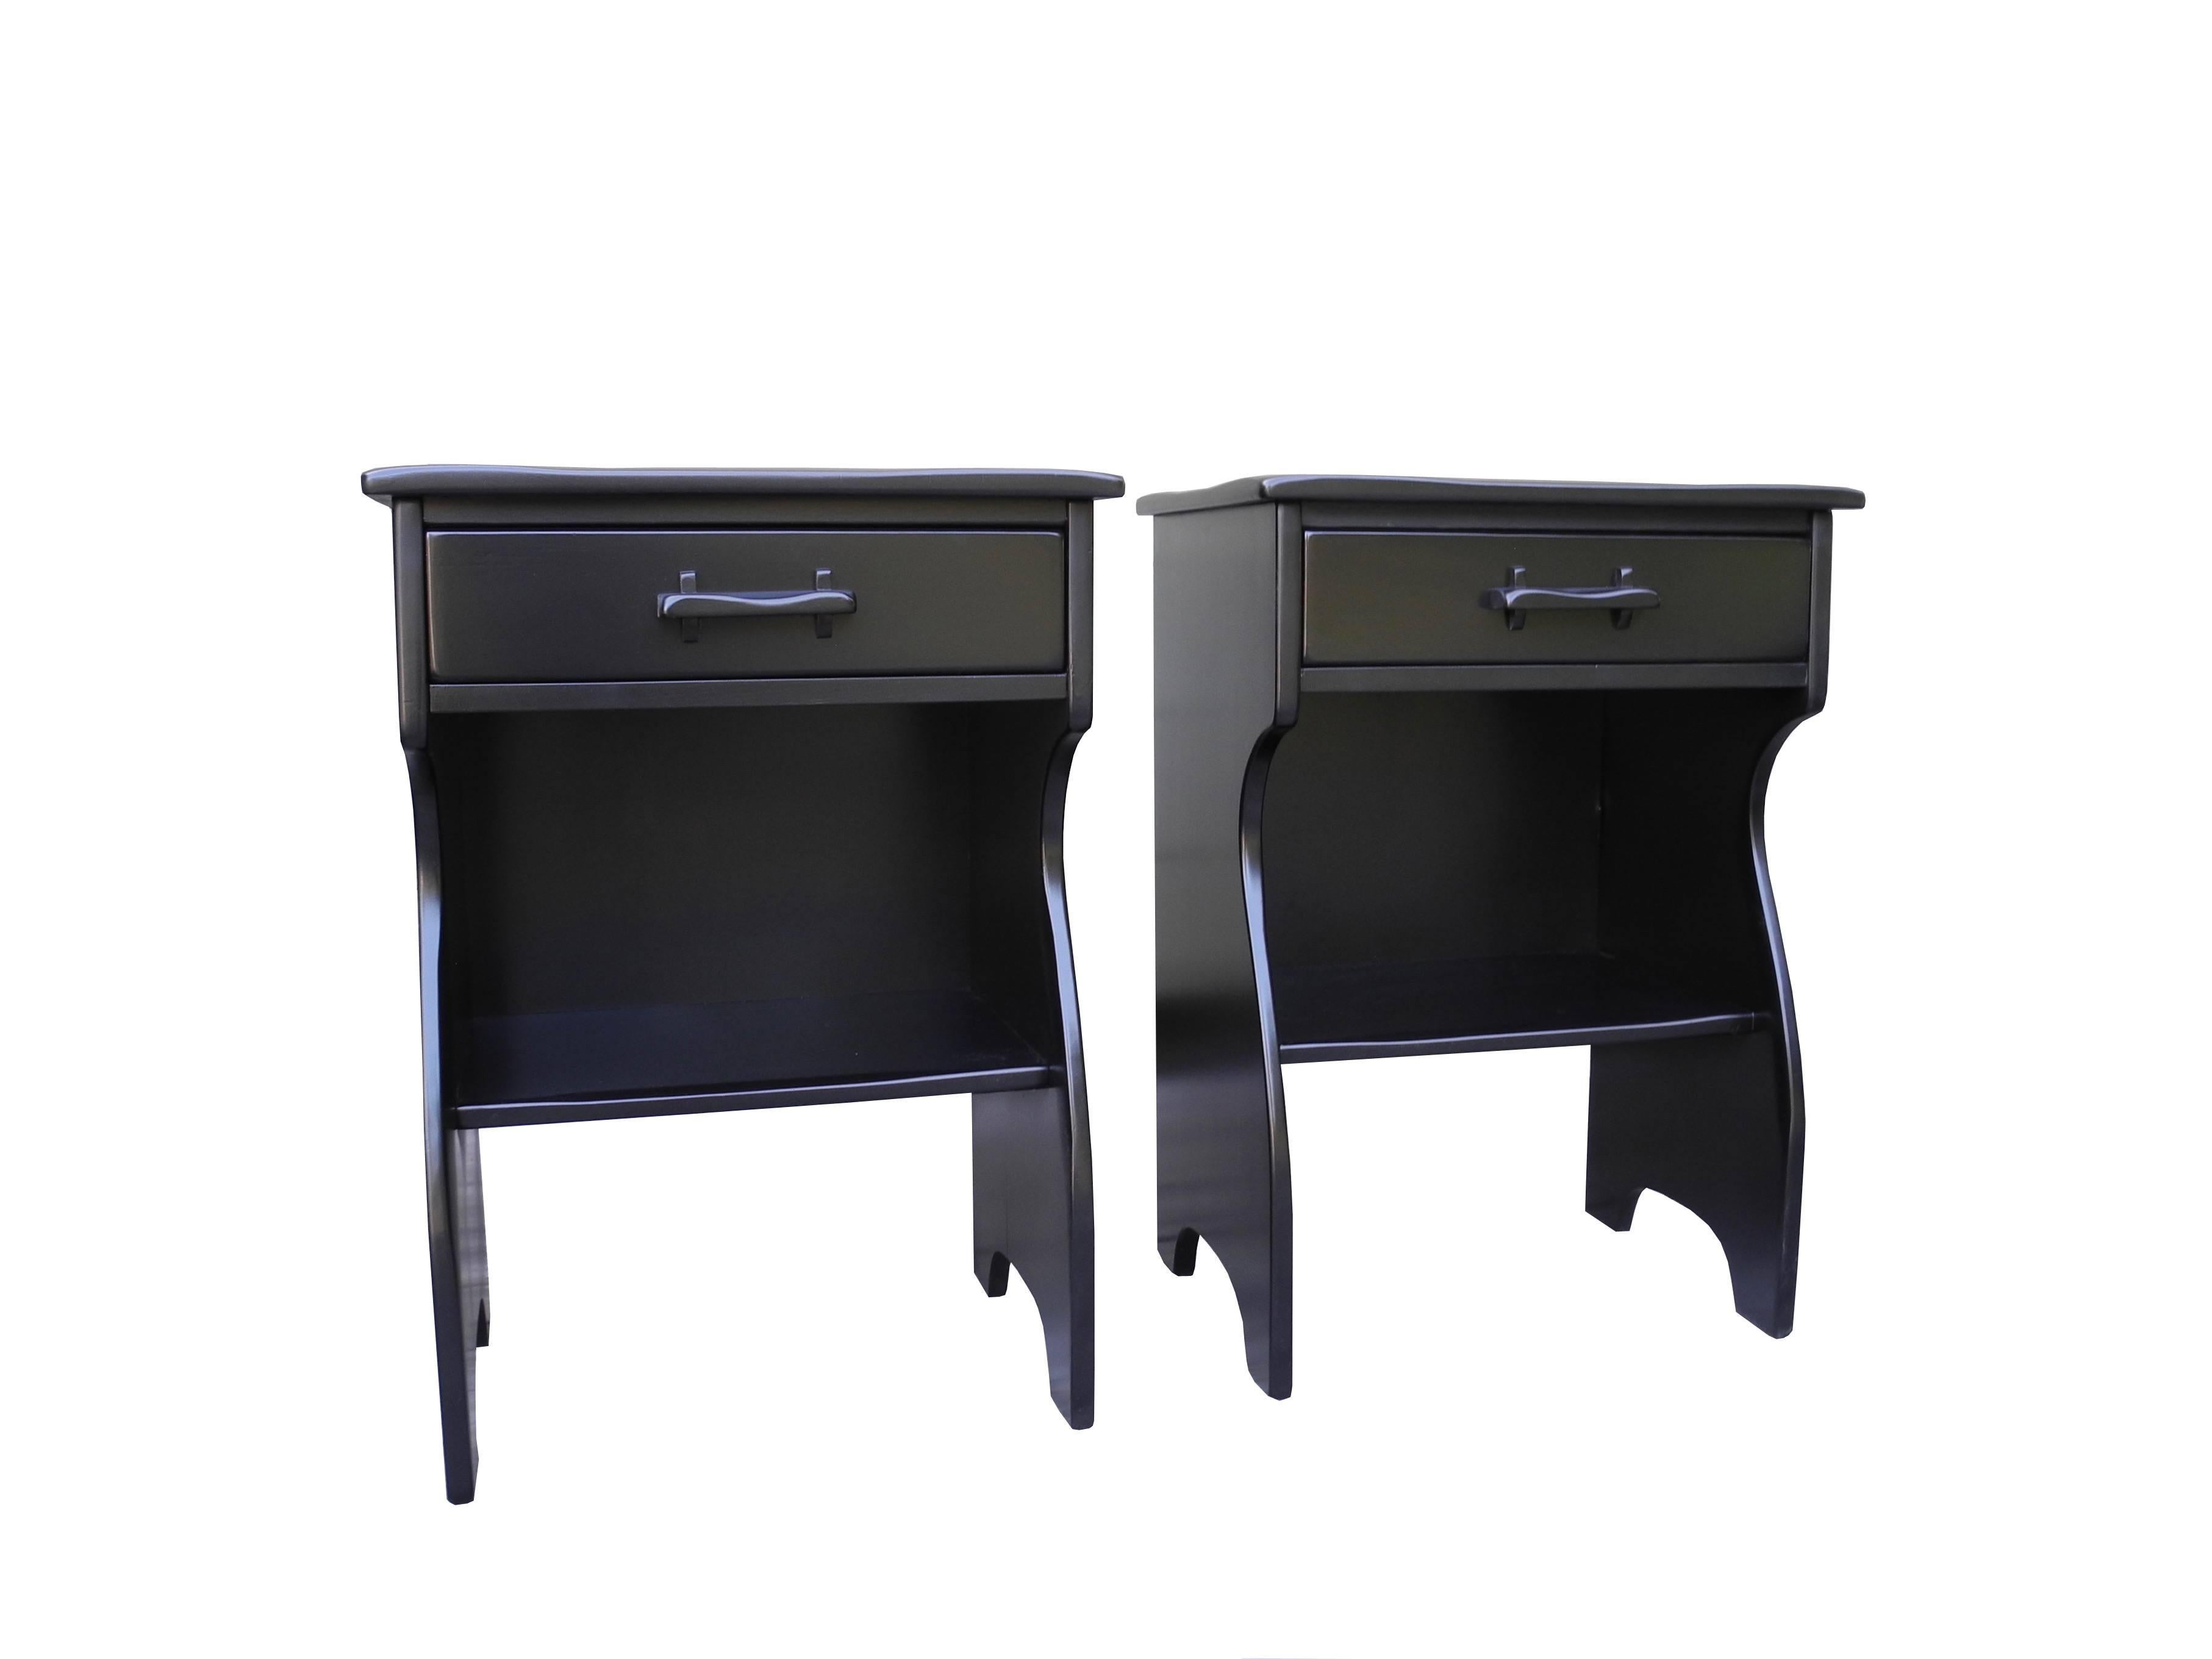 These solid maple nightstands are painted black lacquer are equipped with a cubby shelf and one drawer each.